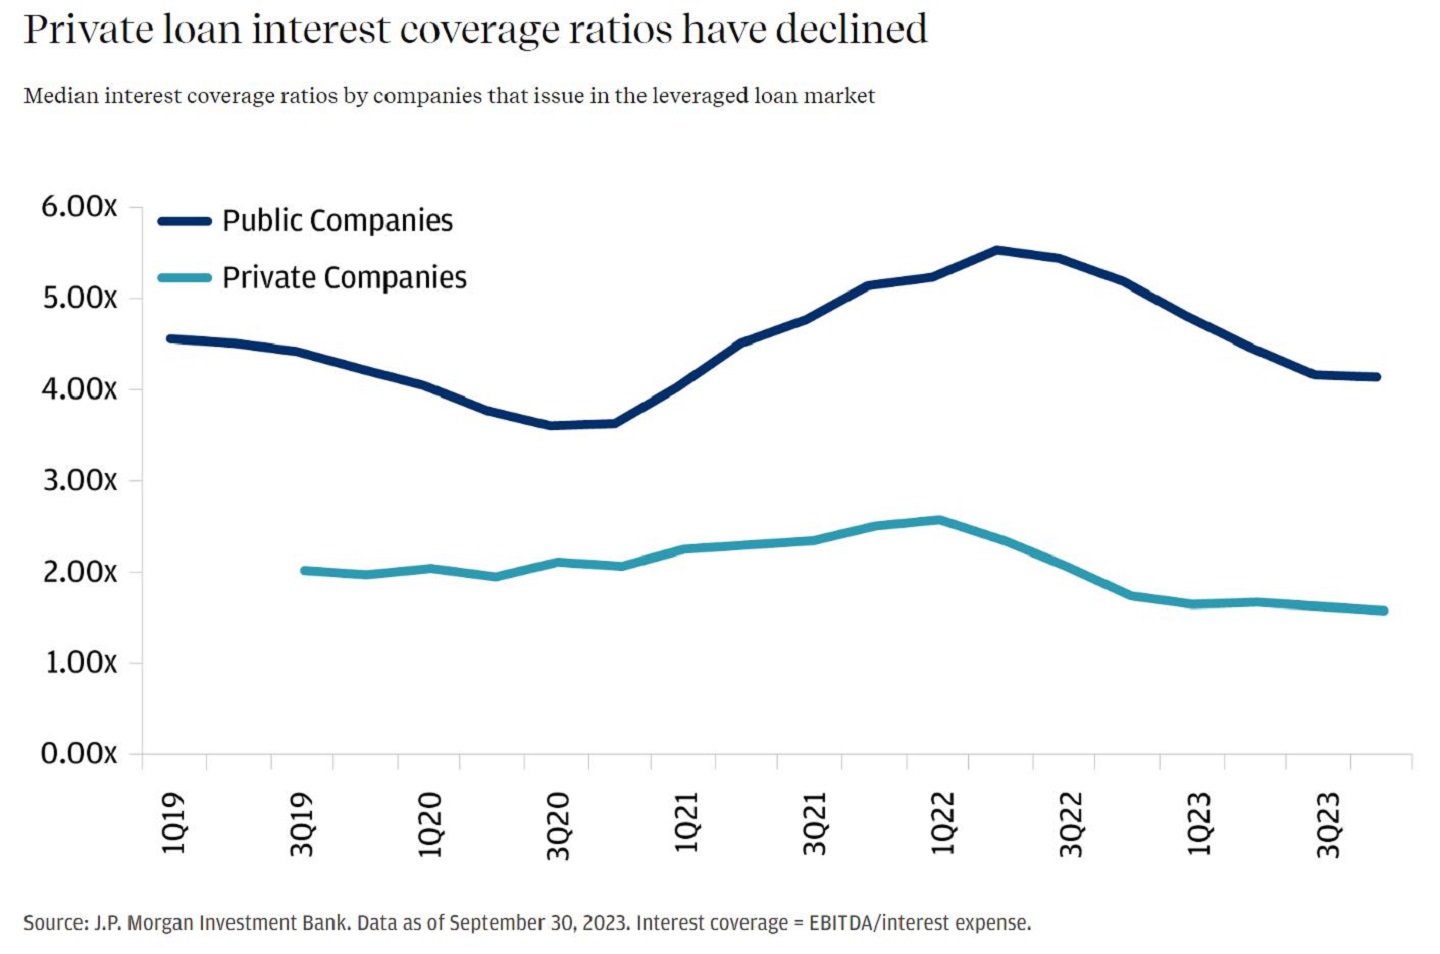 Line chart showing median interest coverage ratios by companies that issue in the leveraged loan market.